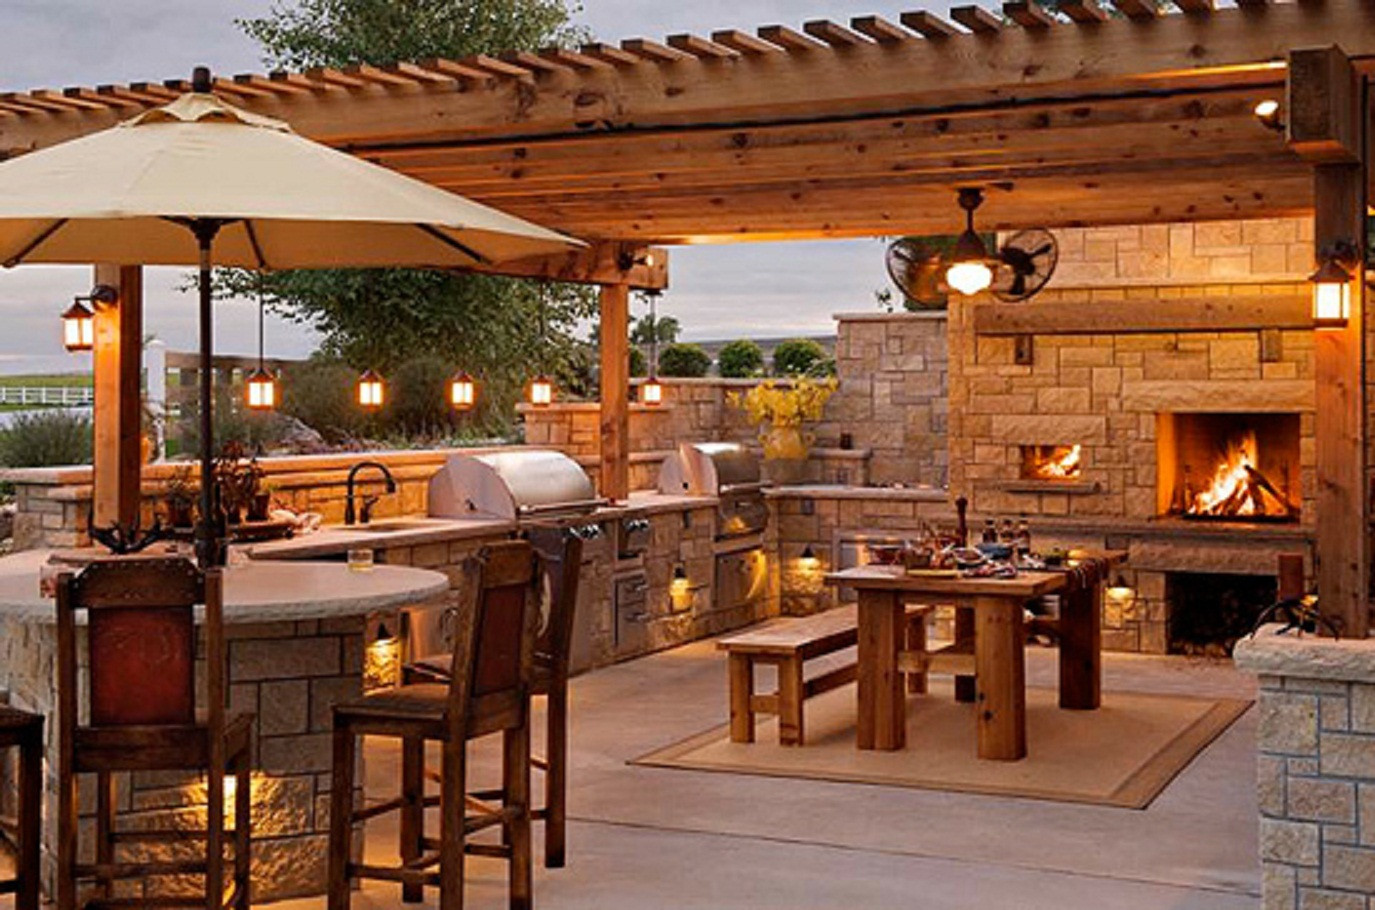 Outdoor Kitchen Designs
 How to Design Your Perfect Outdoor kitchen Outdoor